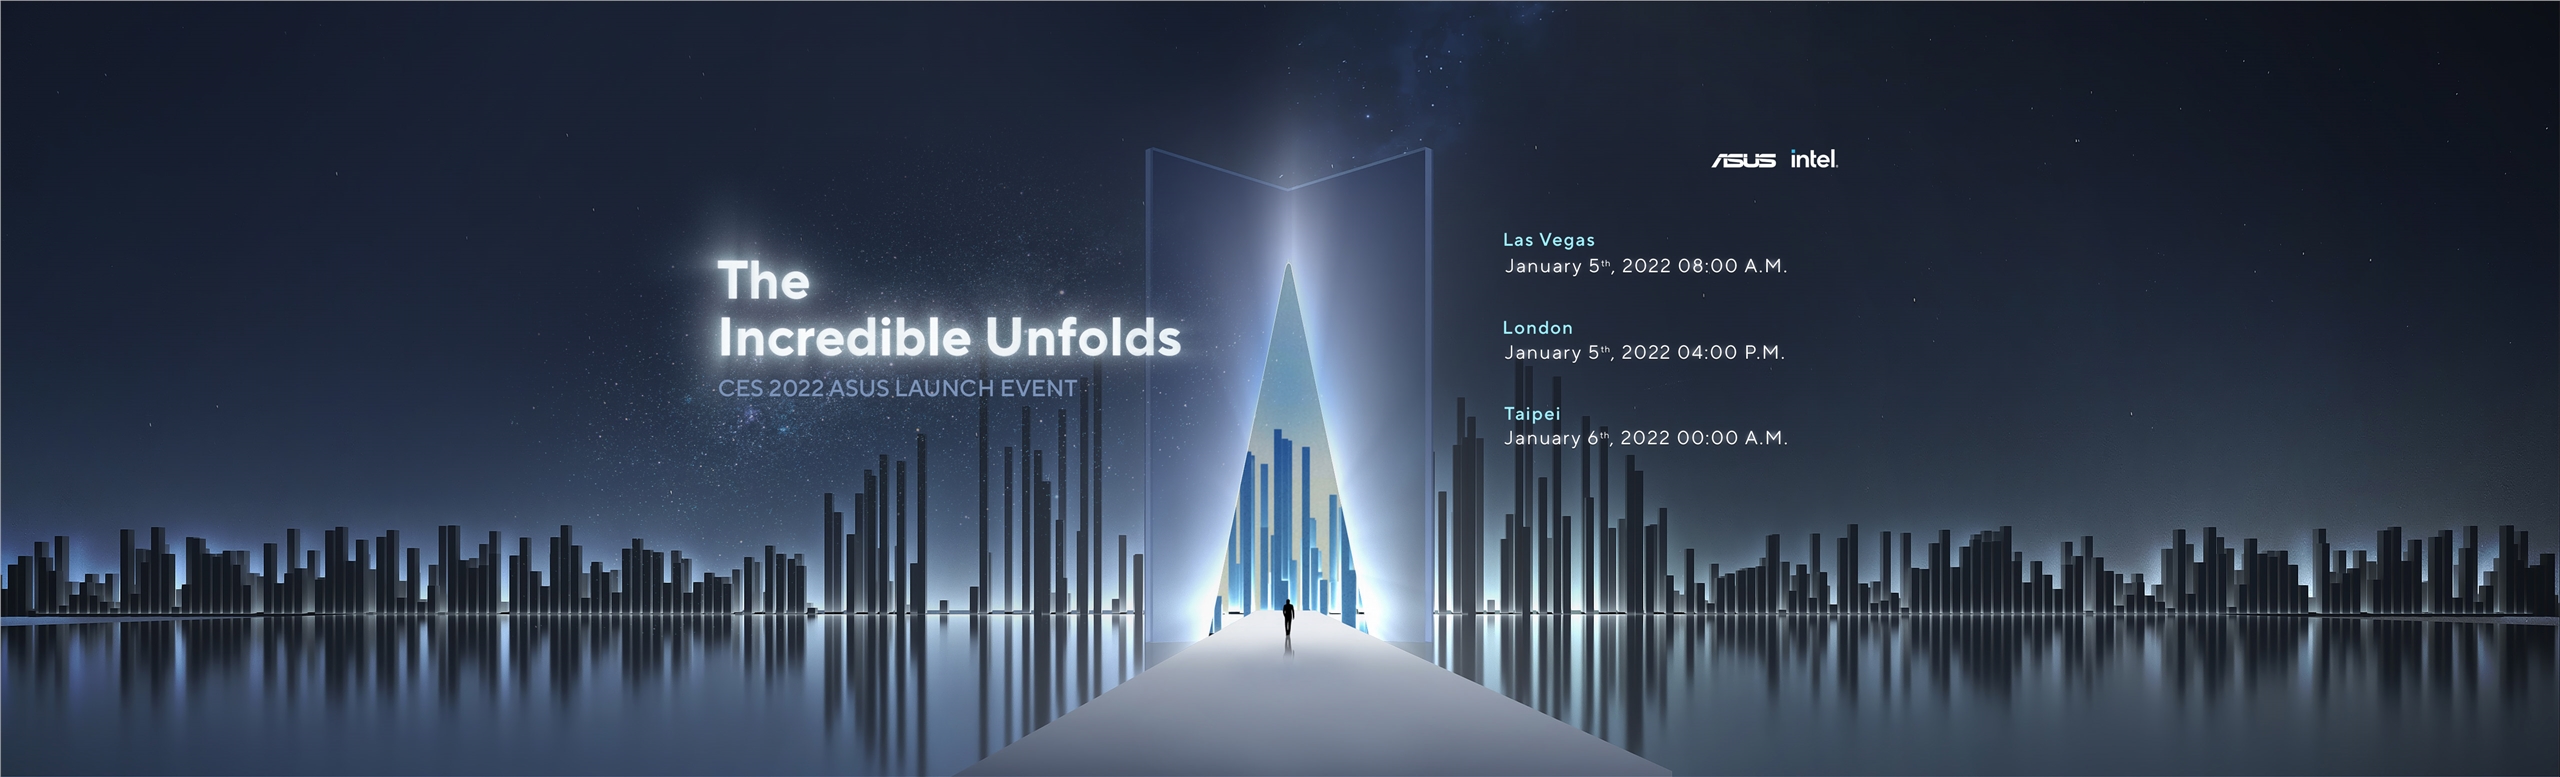 The Incredible Unfolds CES 2022 ASUS Launch Event